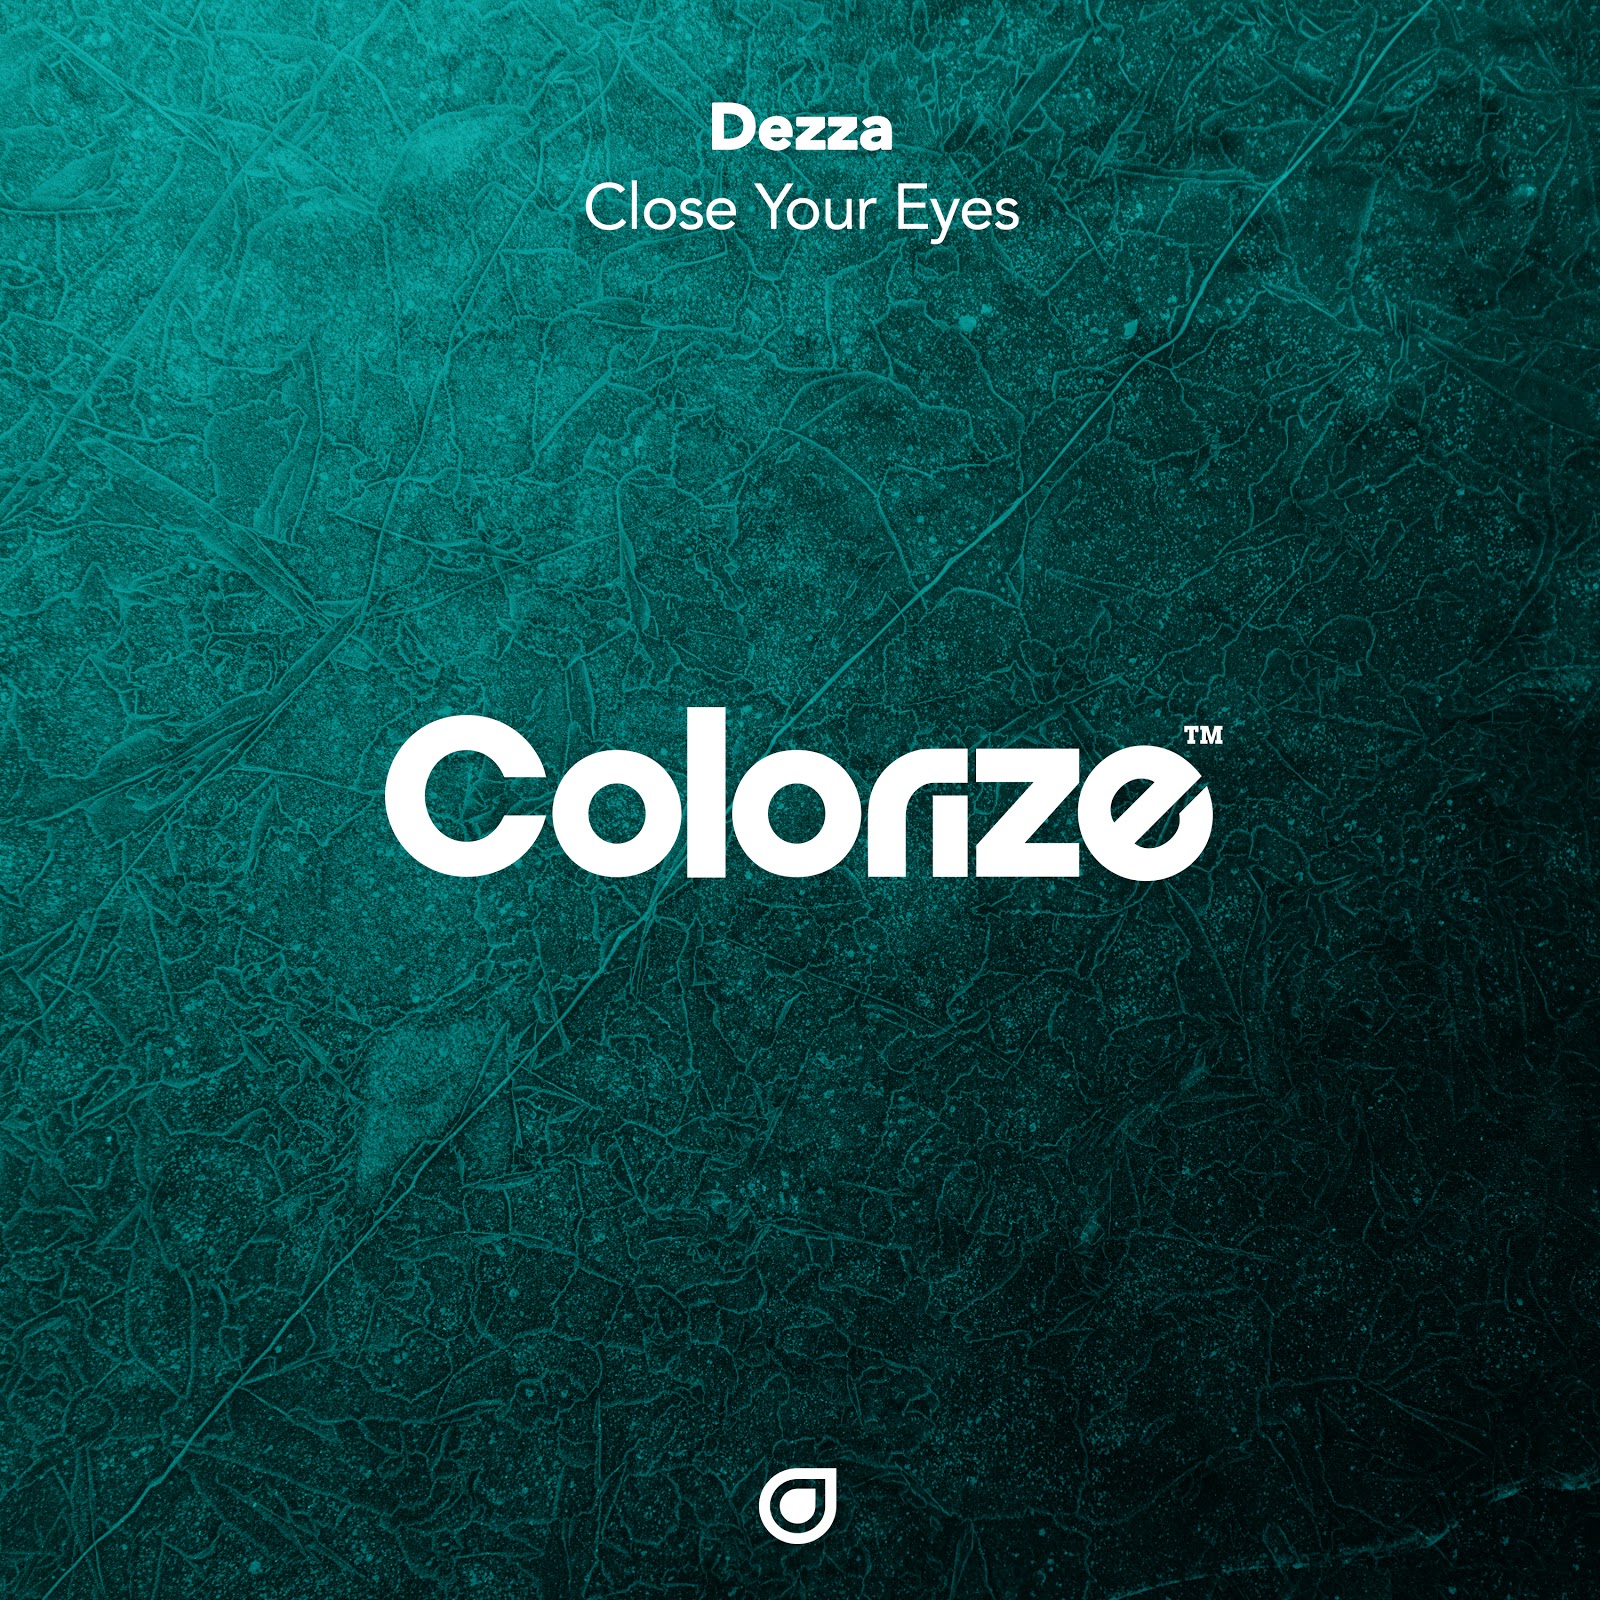 Dezza presents Close Your Eyes on Colorize